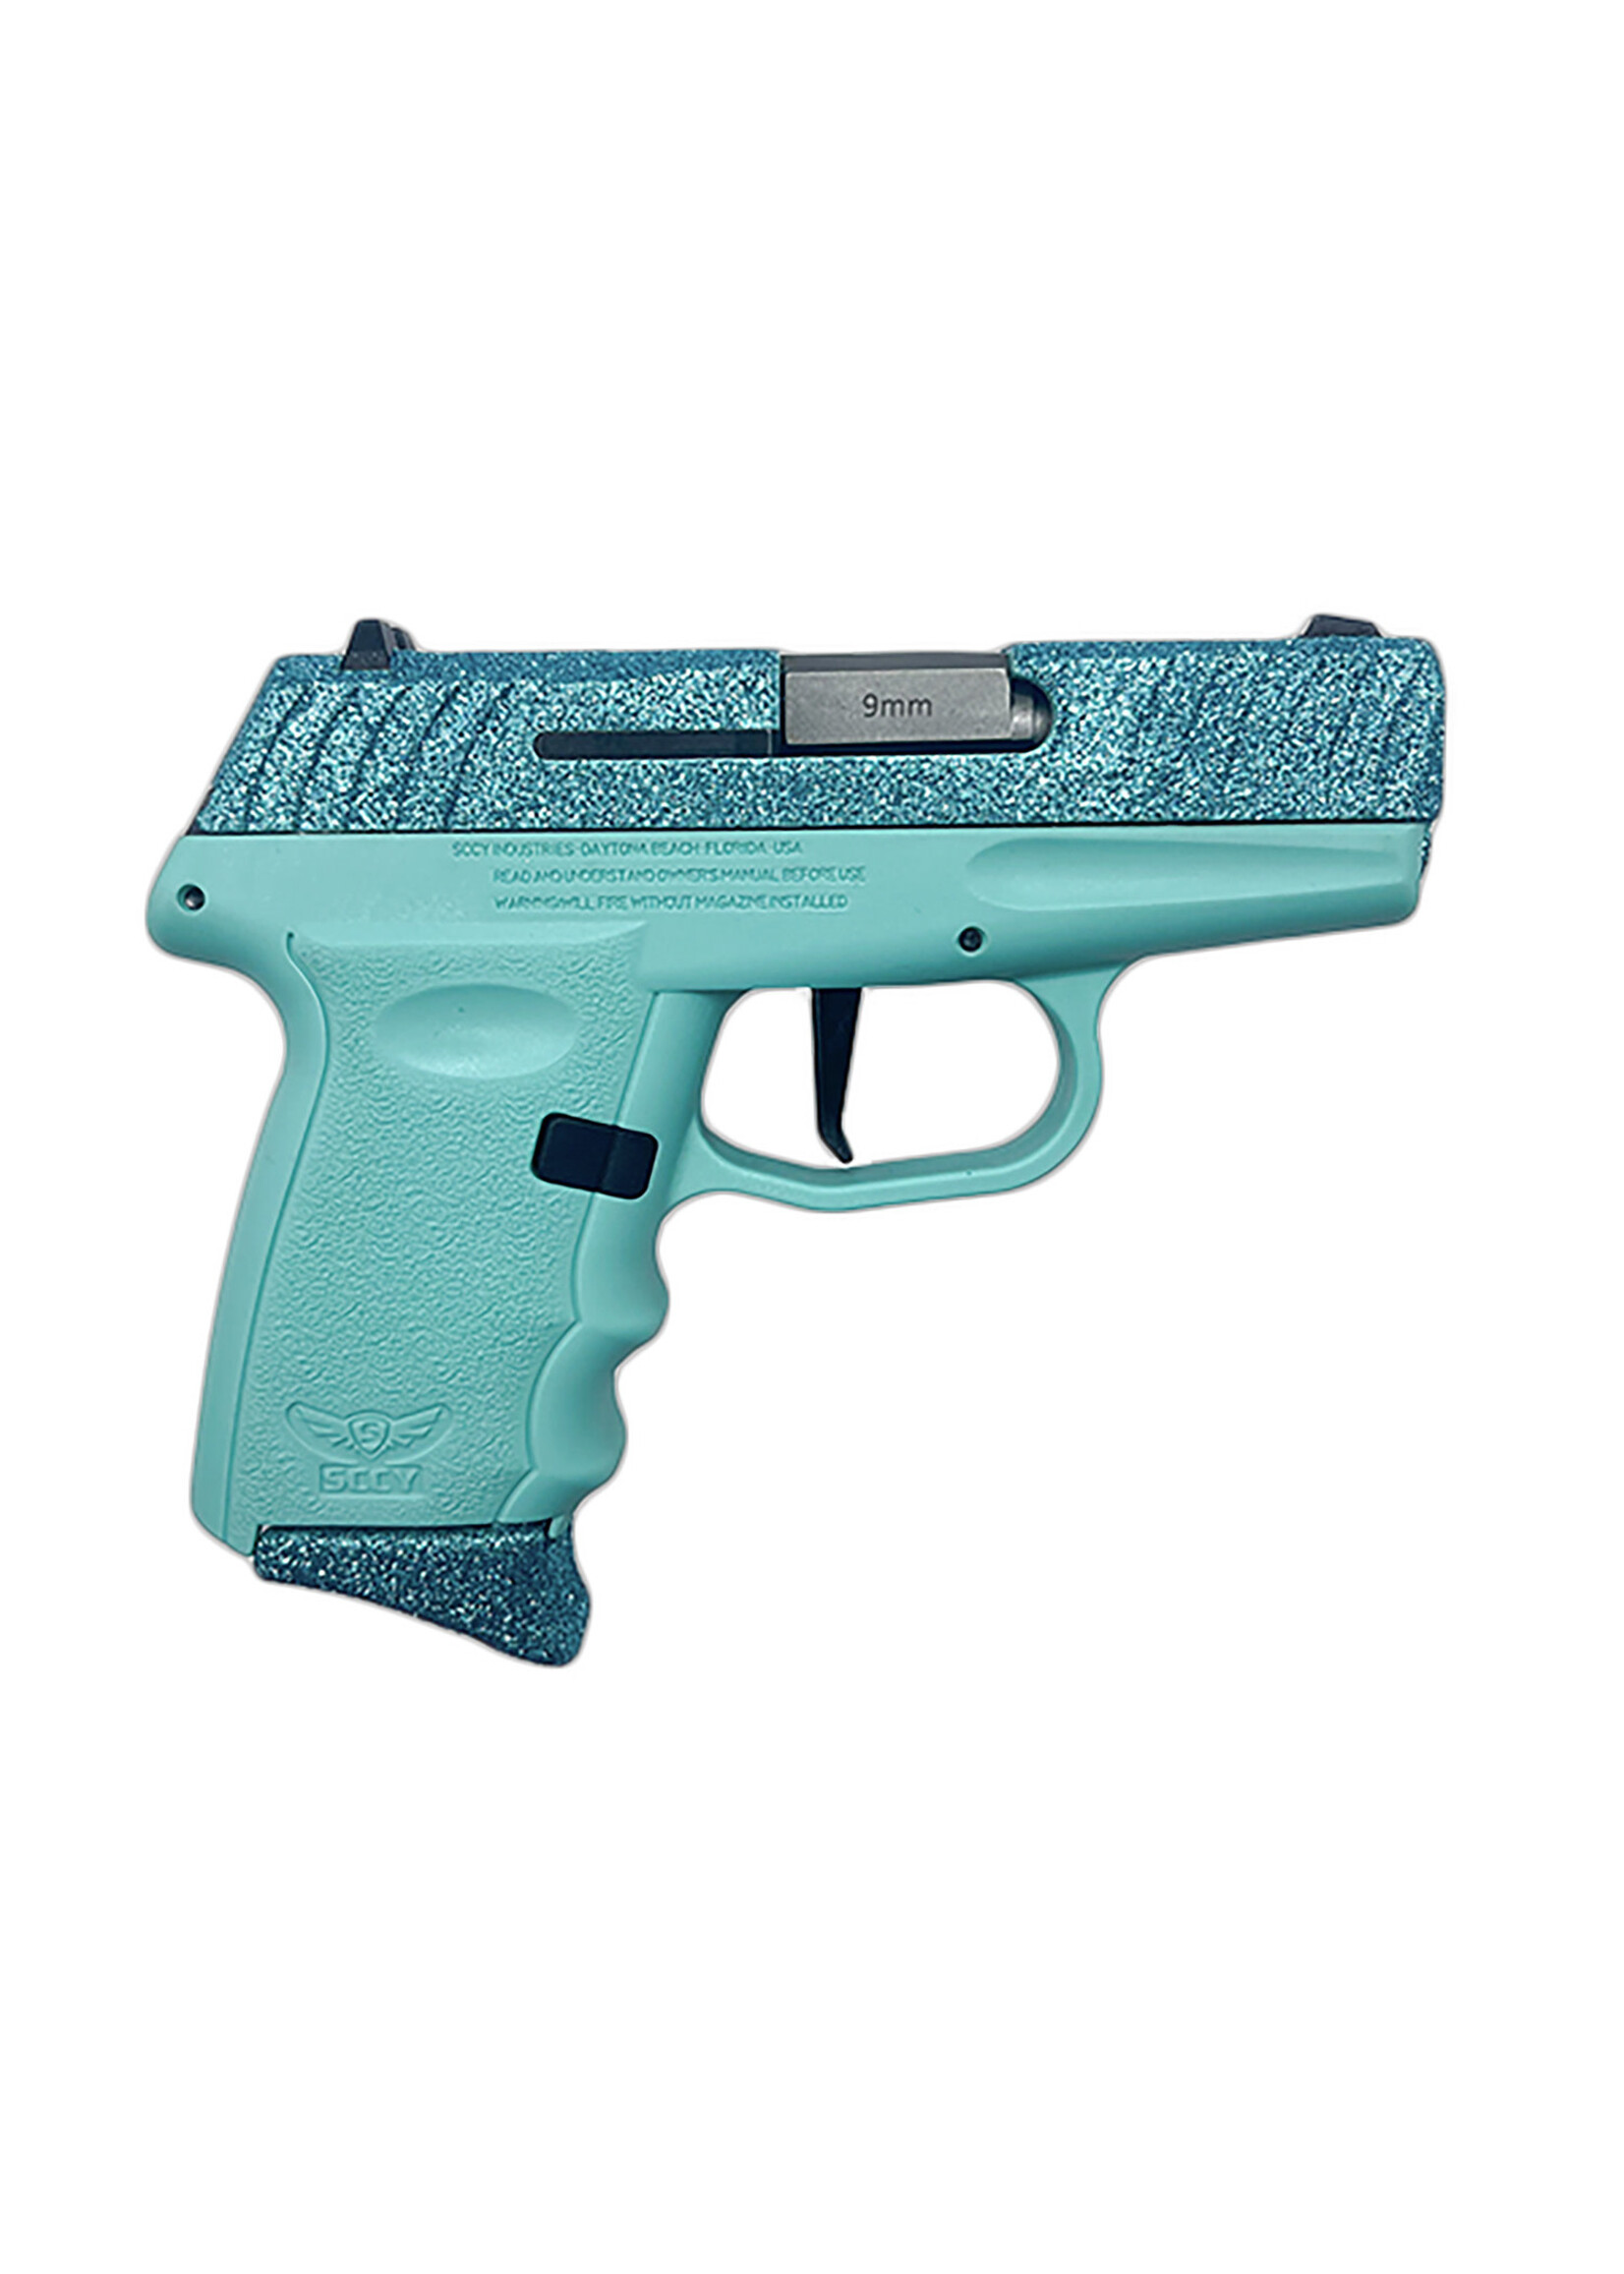 Sccy Industries SCCY Industries DVG1CYBSB DVG-1 Sub-Compact Frame 9mm Luger 10+1 3.10" Stainless Quadlock Barrel Cystal Blue Glitter Optic Ready/Serrated Stainless Steel Slide, Crystal Blue Polymer Frame & Grip